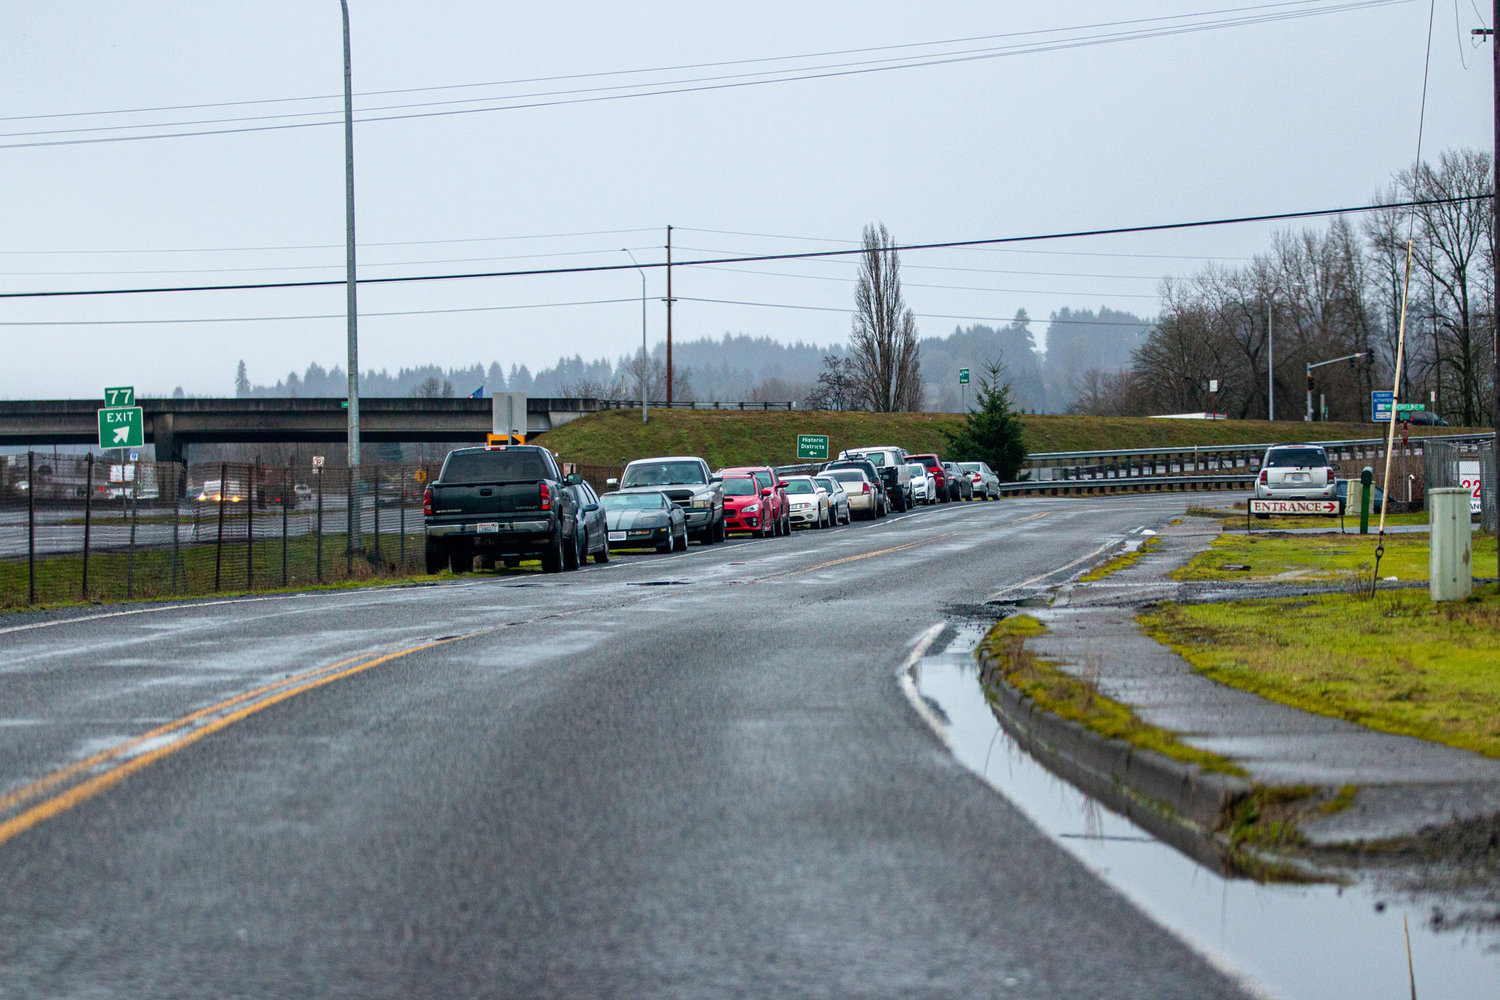 Vehicles lined up on SW Riverside Drive due to flooding onto NW Shoreline Drive from the Chehalis River.